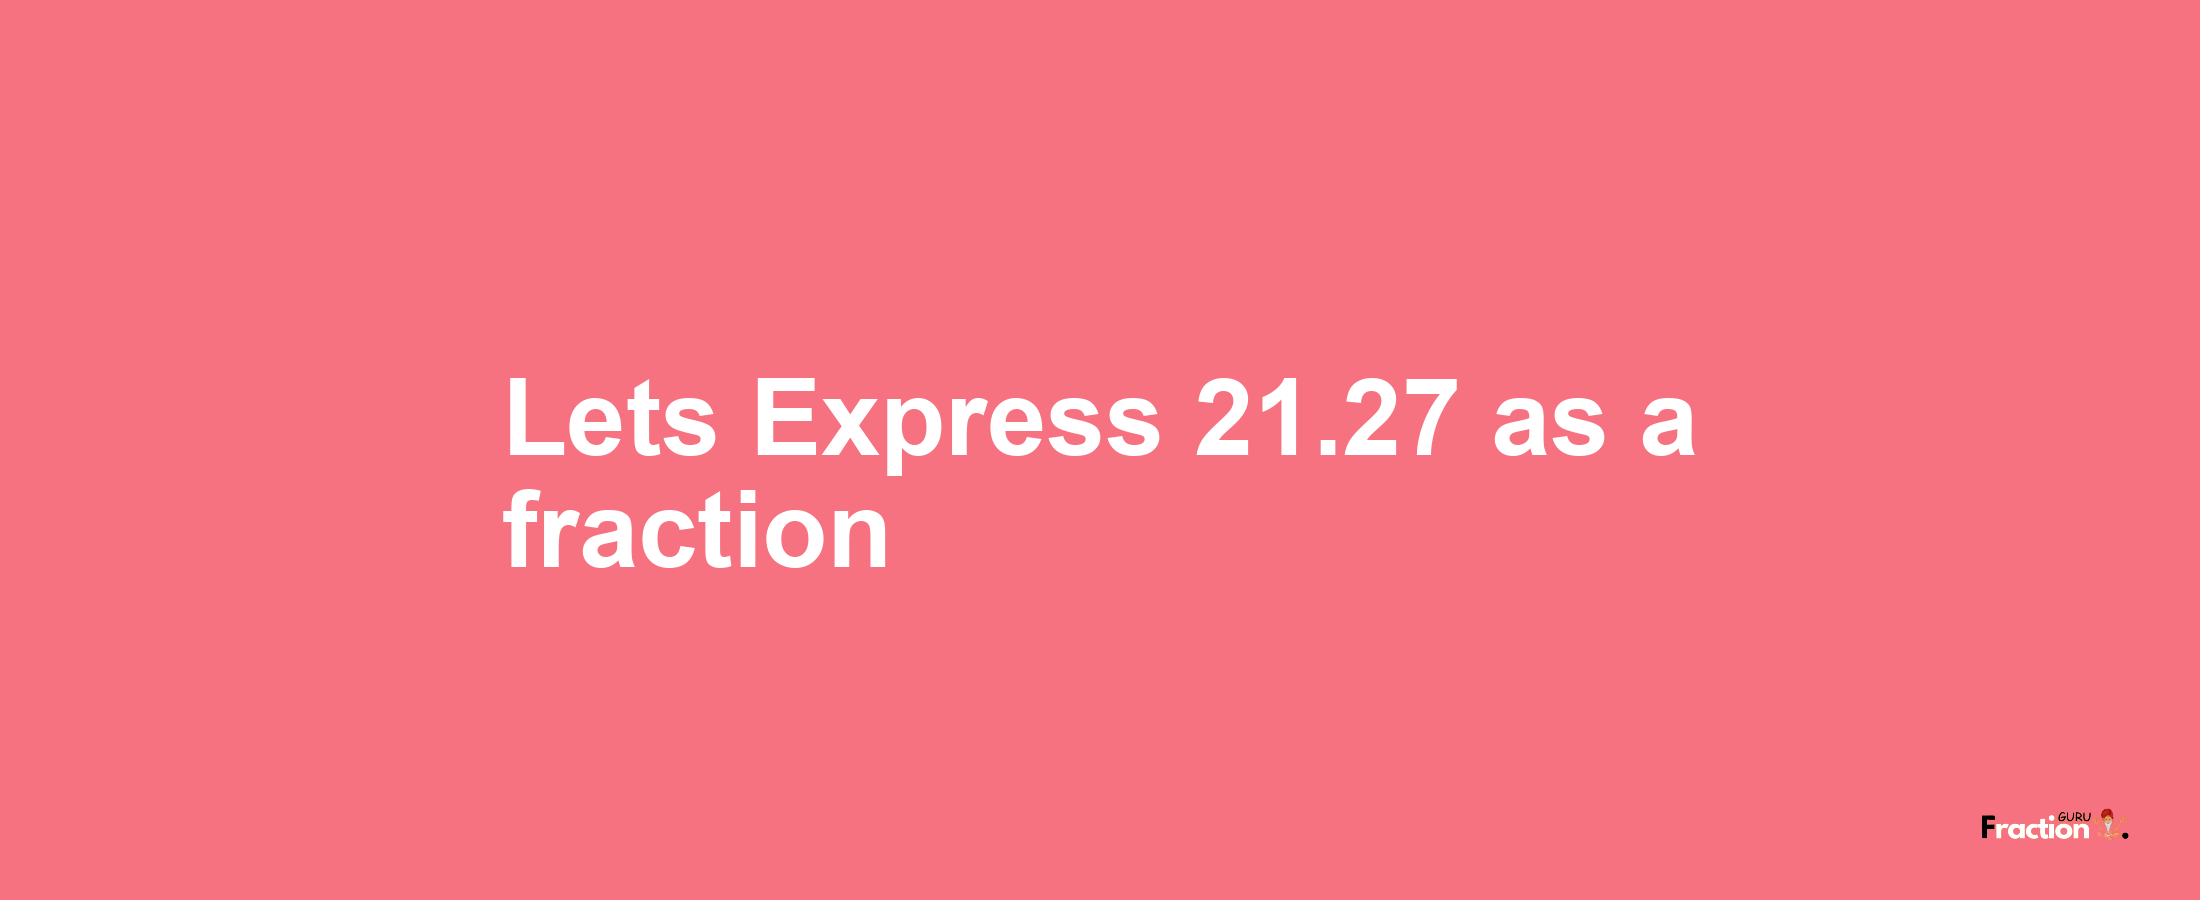 Lets Express 21.27 as afraction